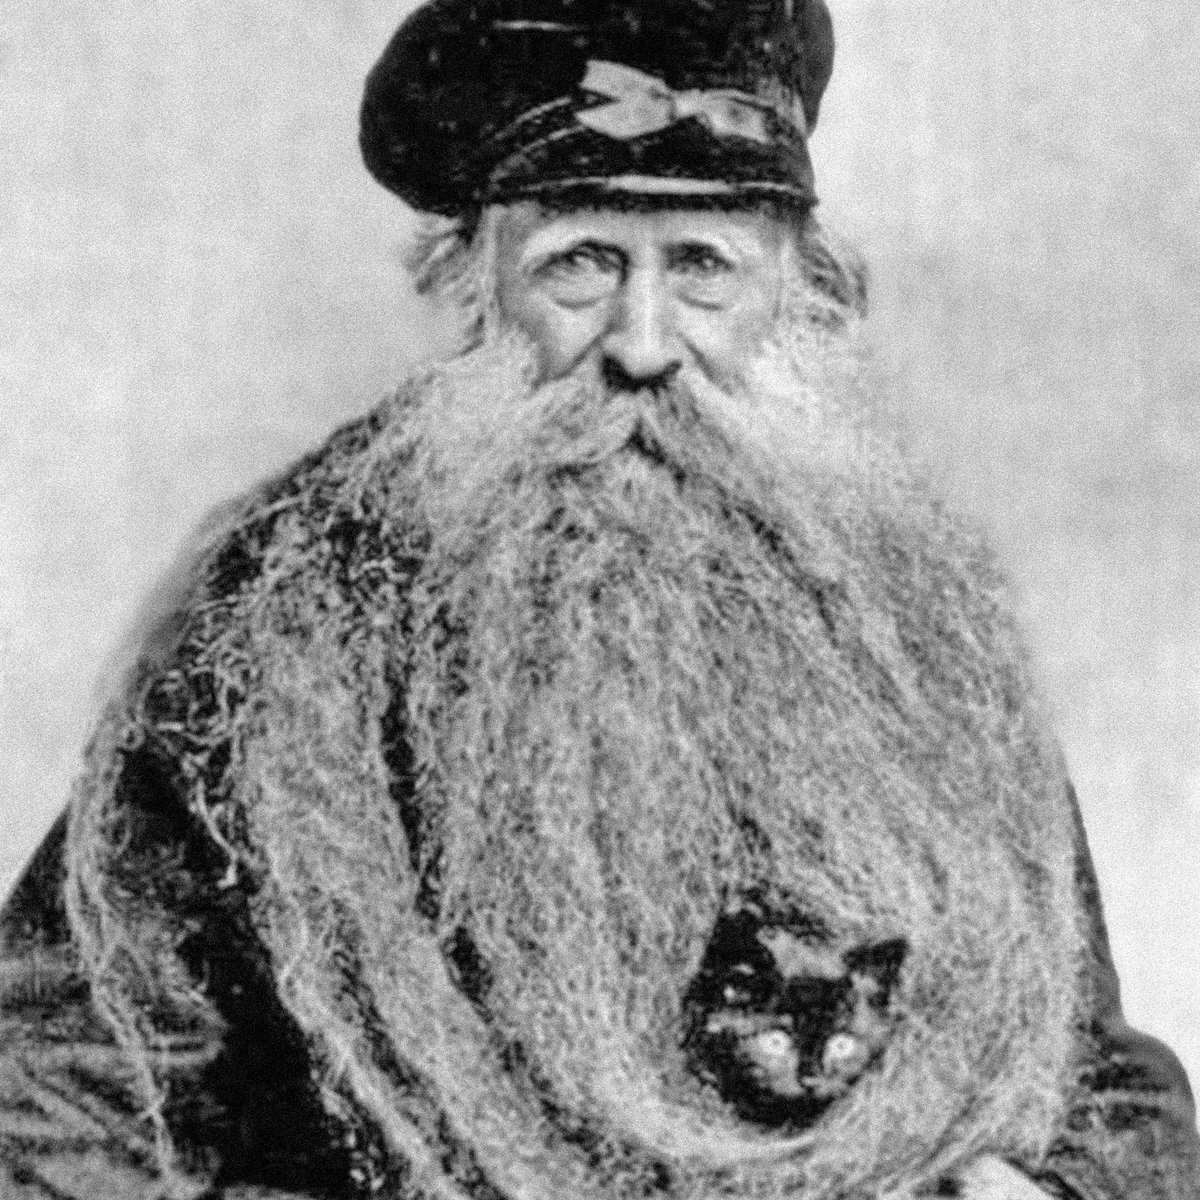 1904: Cat beard _ Louis Coulon, born in 1826, had a 19.6 inches long beard by the time he was 14. _ For more pictures like. this, follow @Retronaut